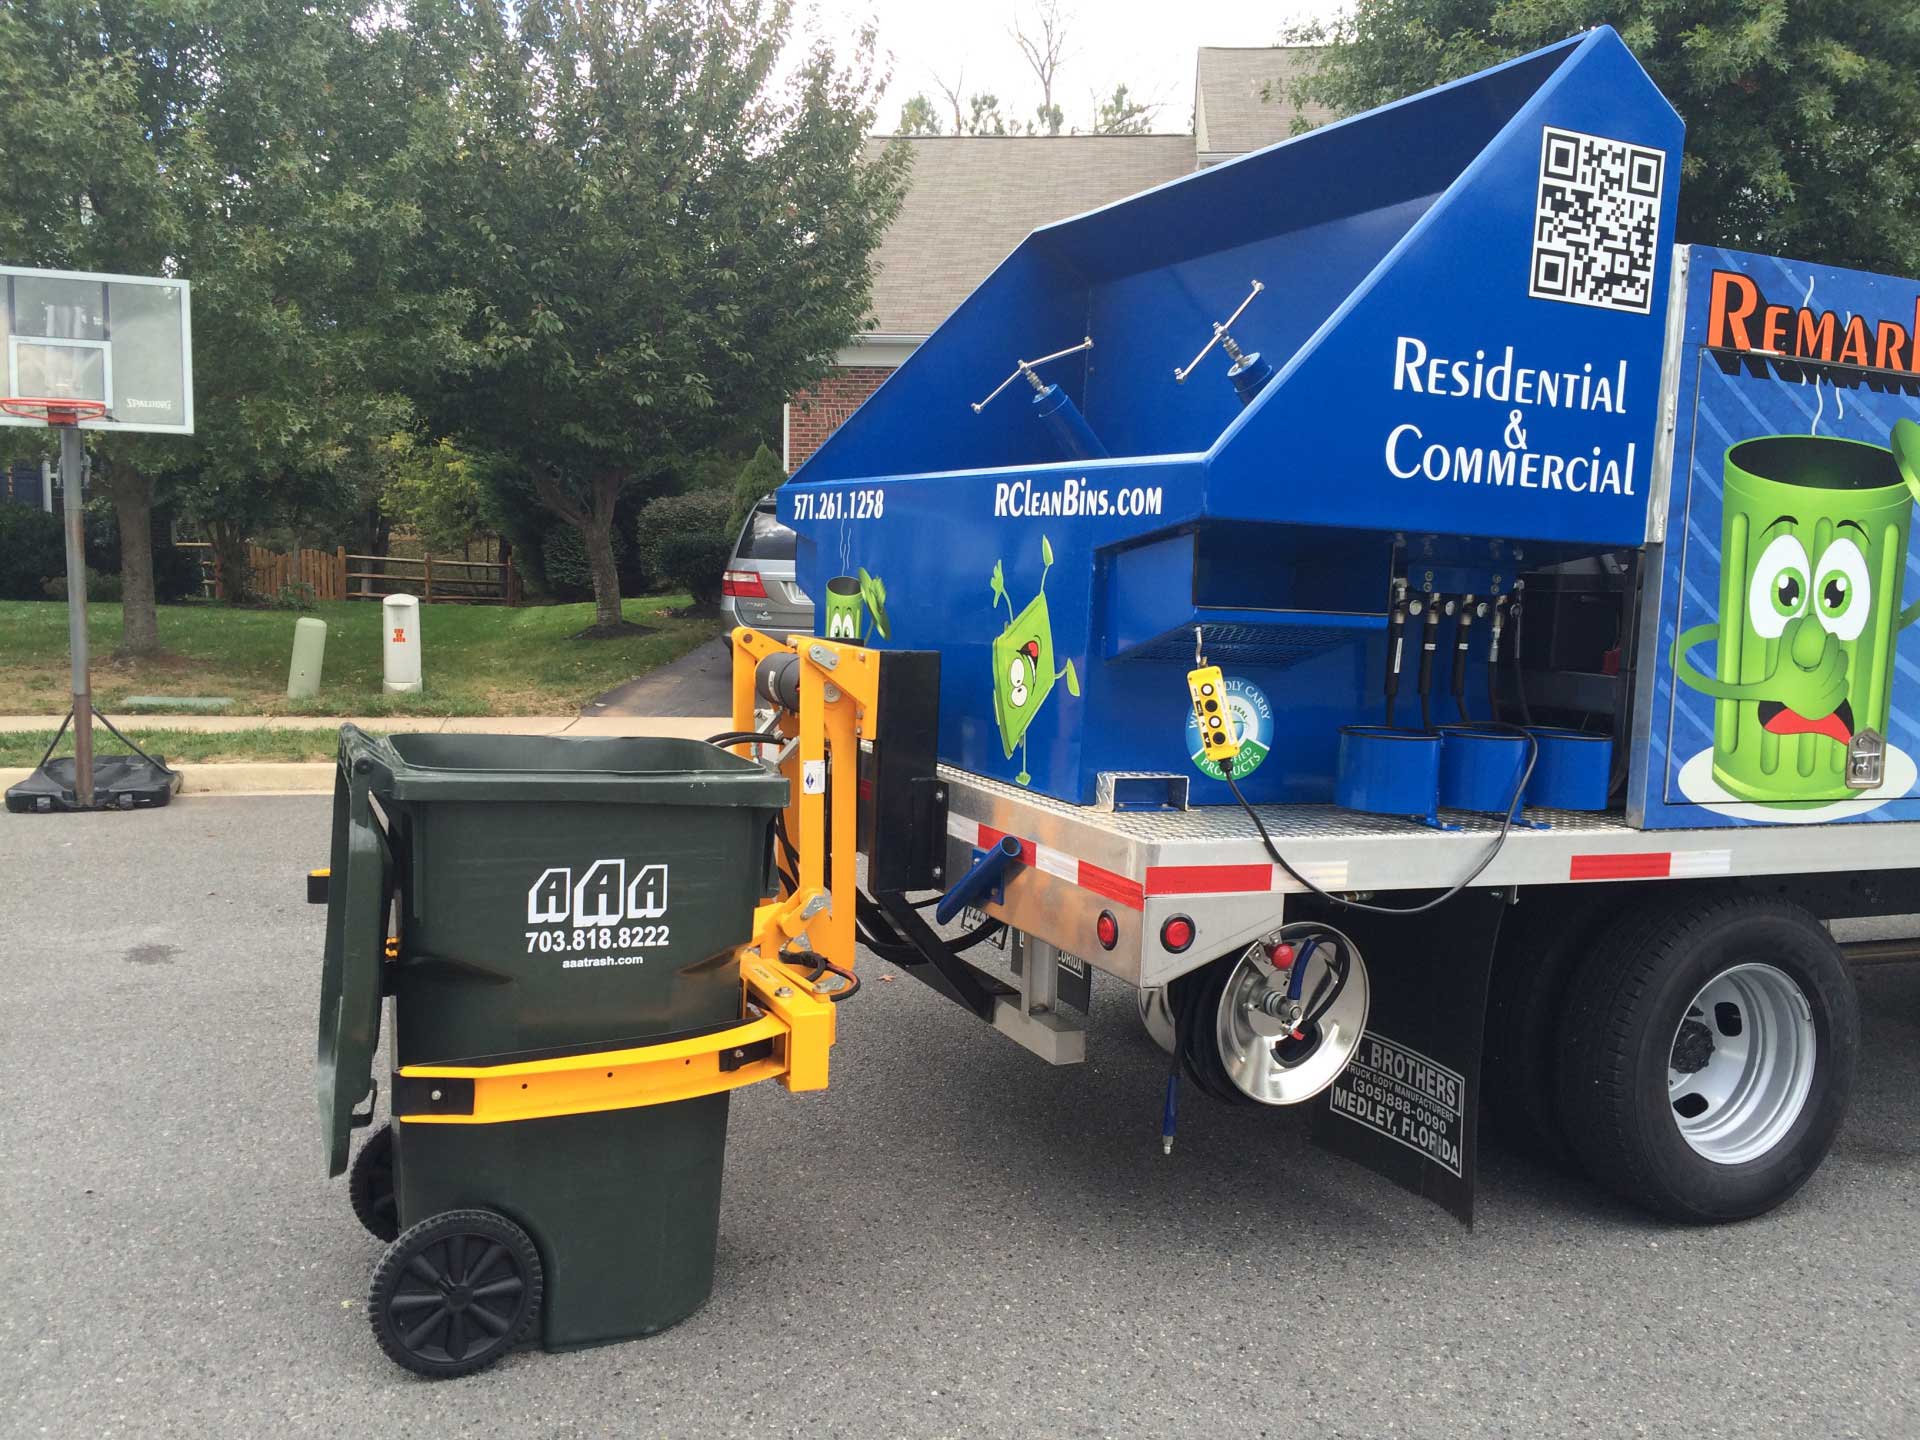 this is a photo of a garbage truck that was used to clean up the sidewalk